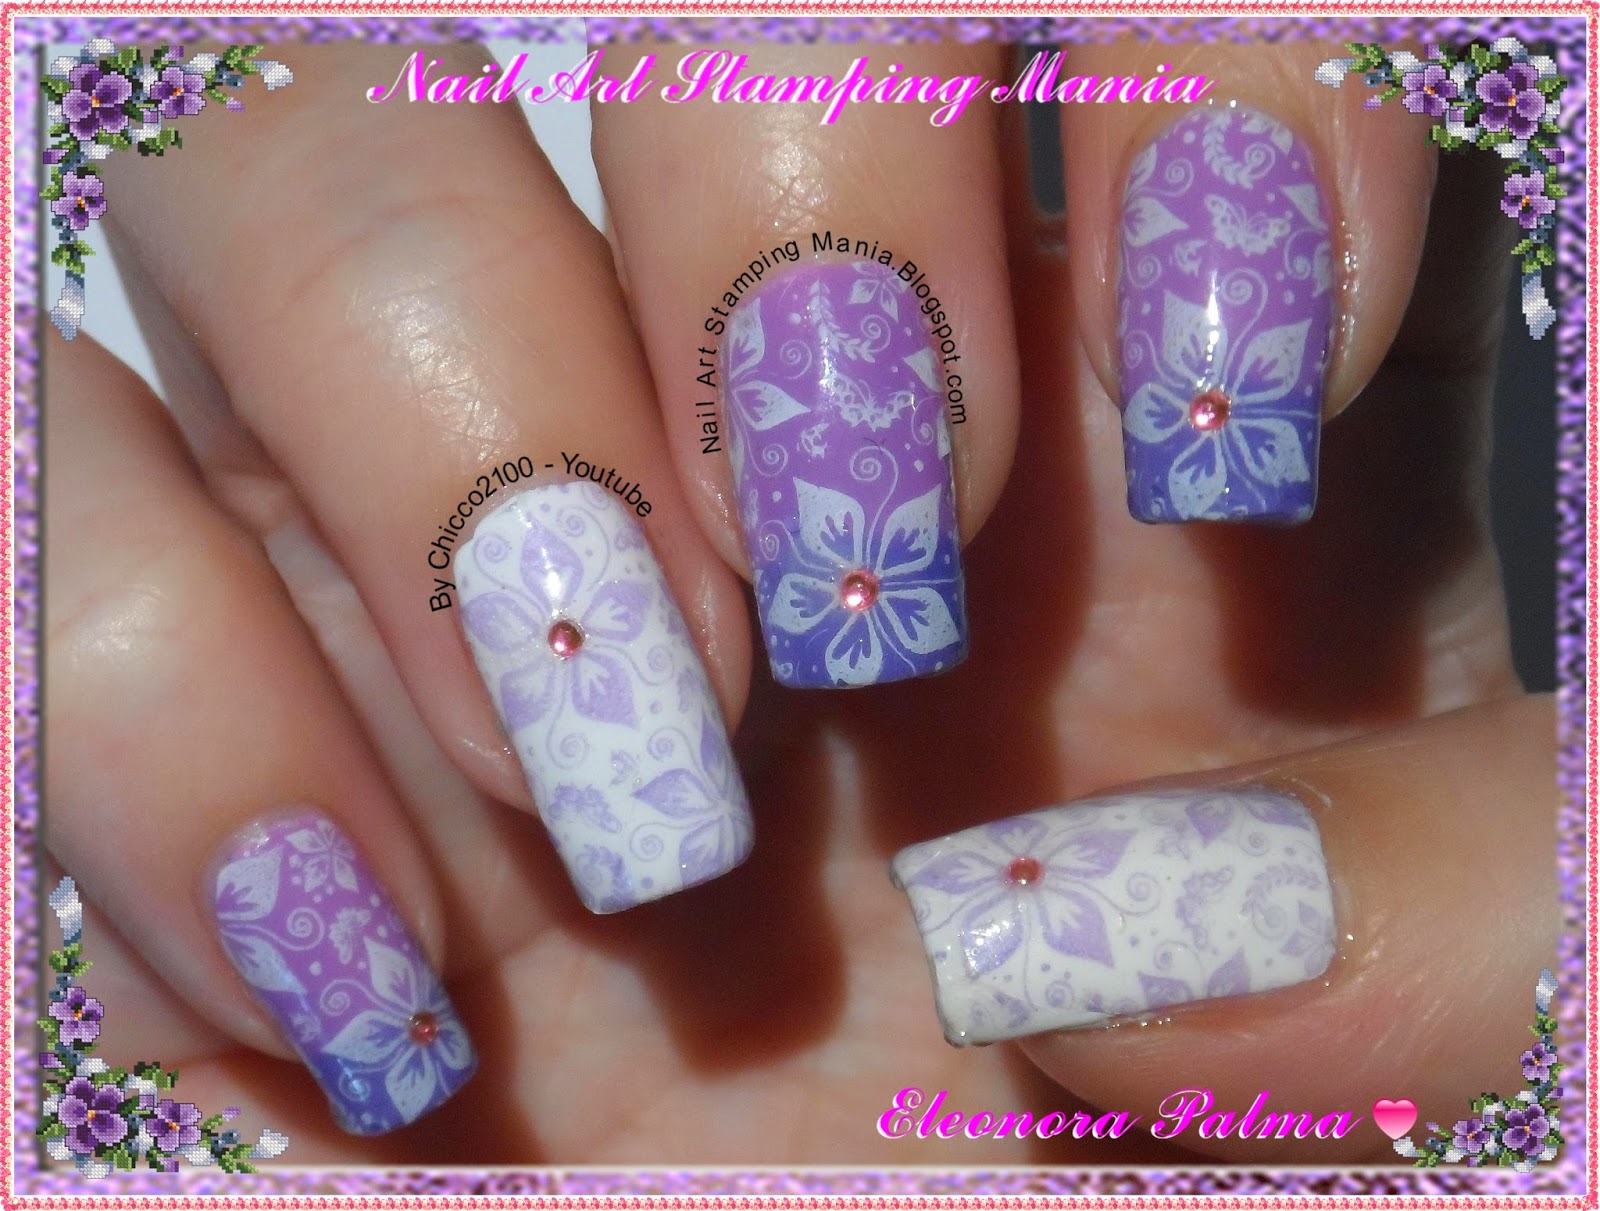 2. Nail Art Stamping Mania Facebook Page - wide 6